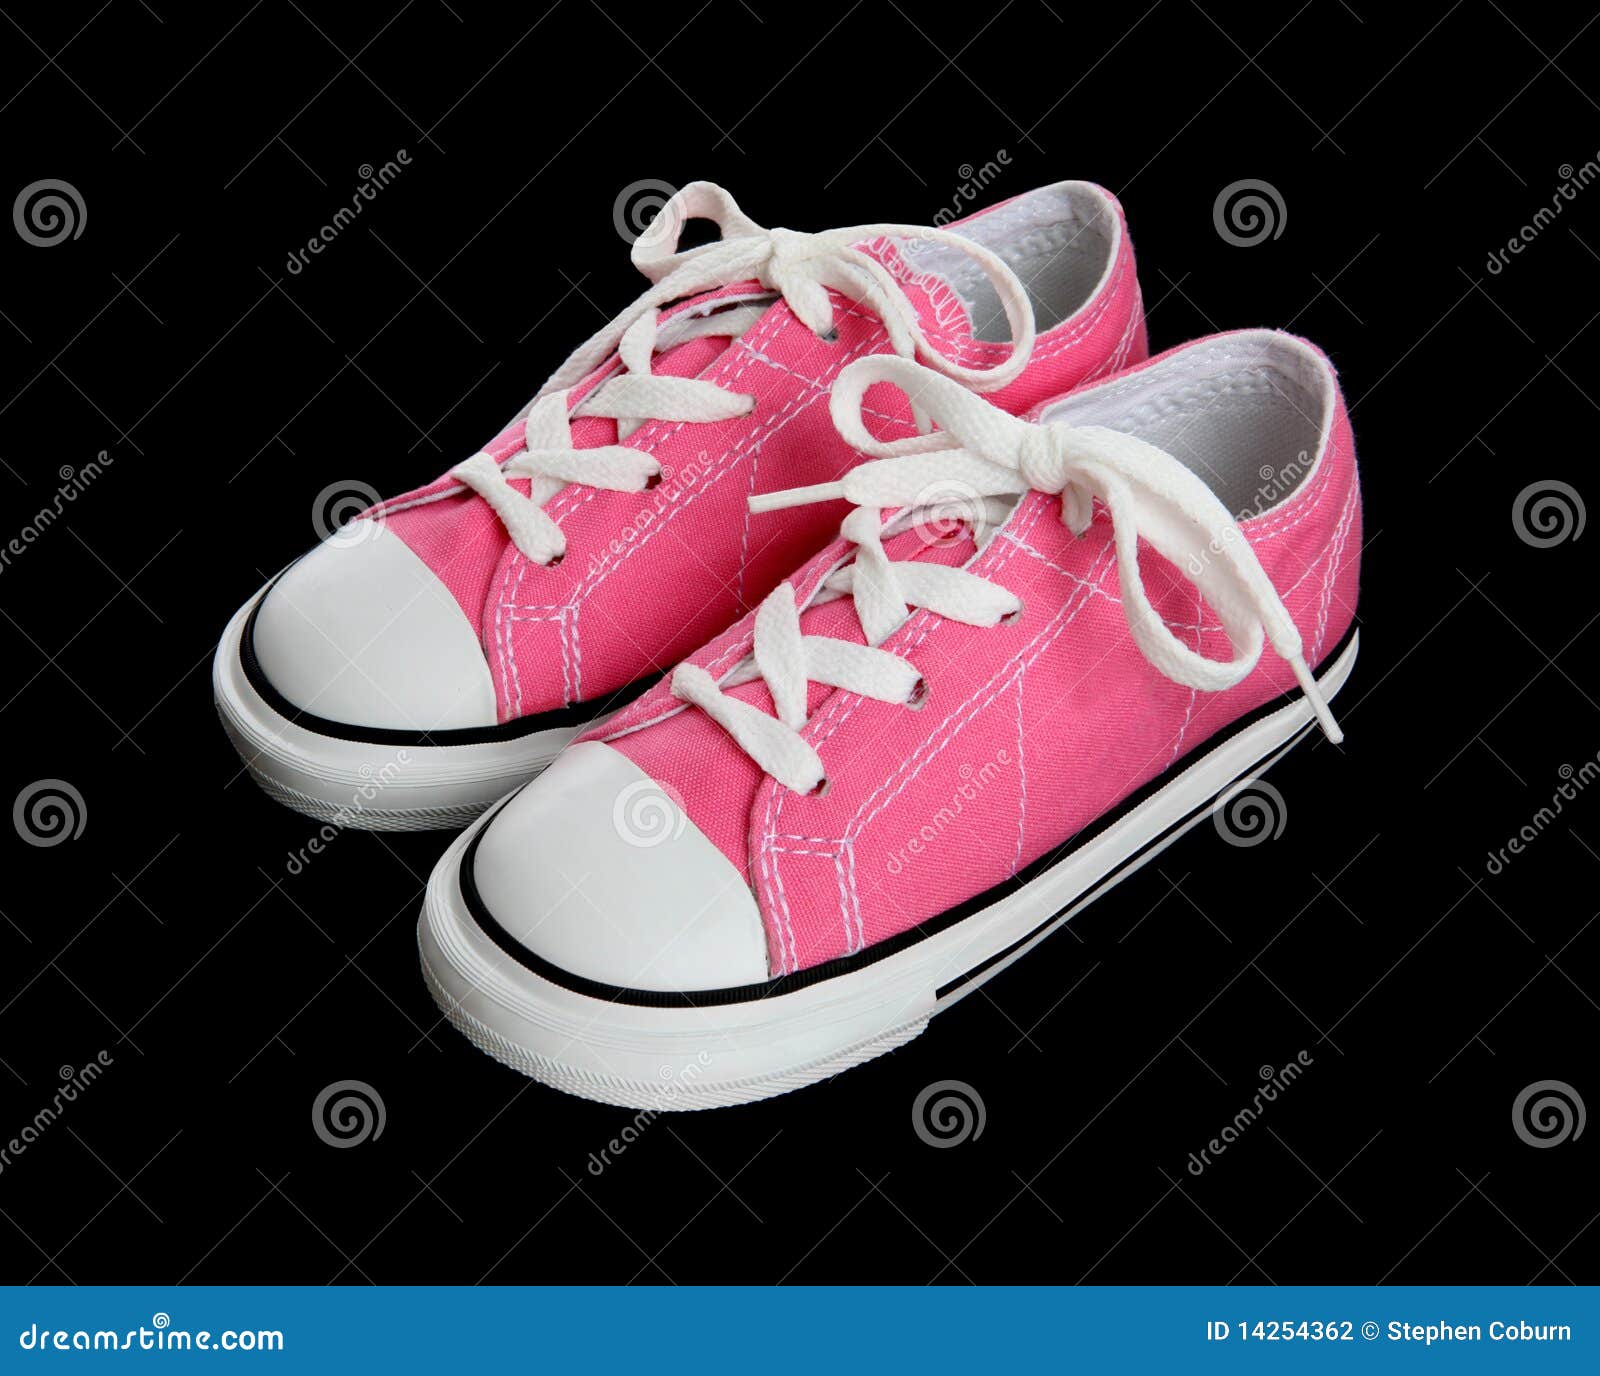 Sneakers (Tennis Shoes) Over Black Stock Photo - Image of pink, shoe ...